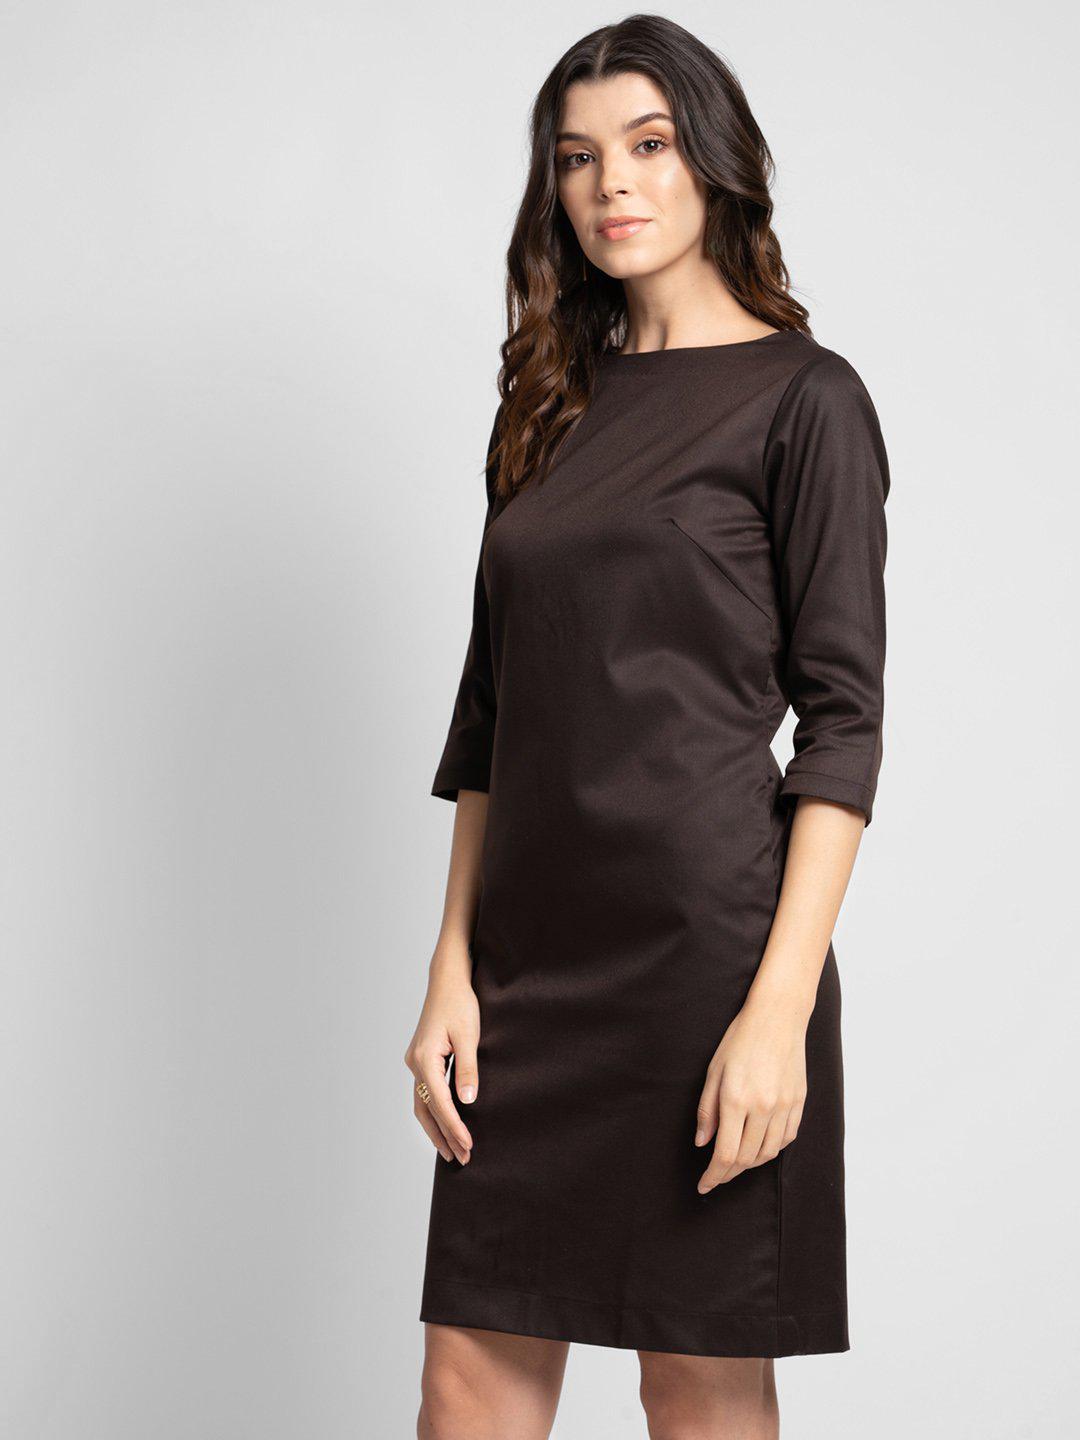 Plain Chocolate Brown Women Stretch Pant Suit, Waist Size: 30.0 at Rs  3000/piece in Gurgaon